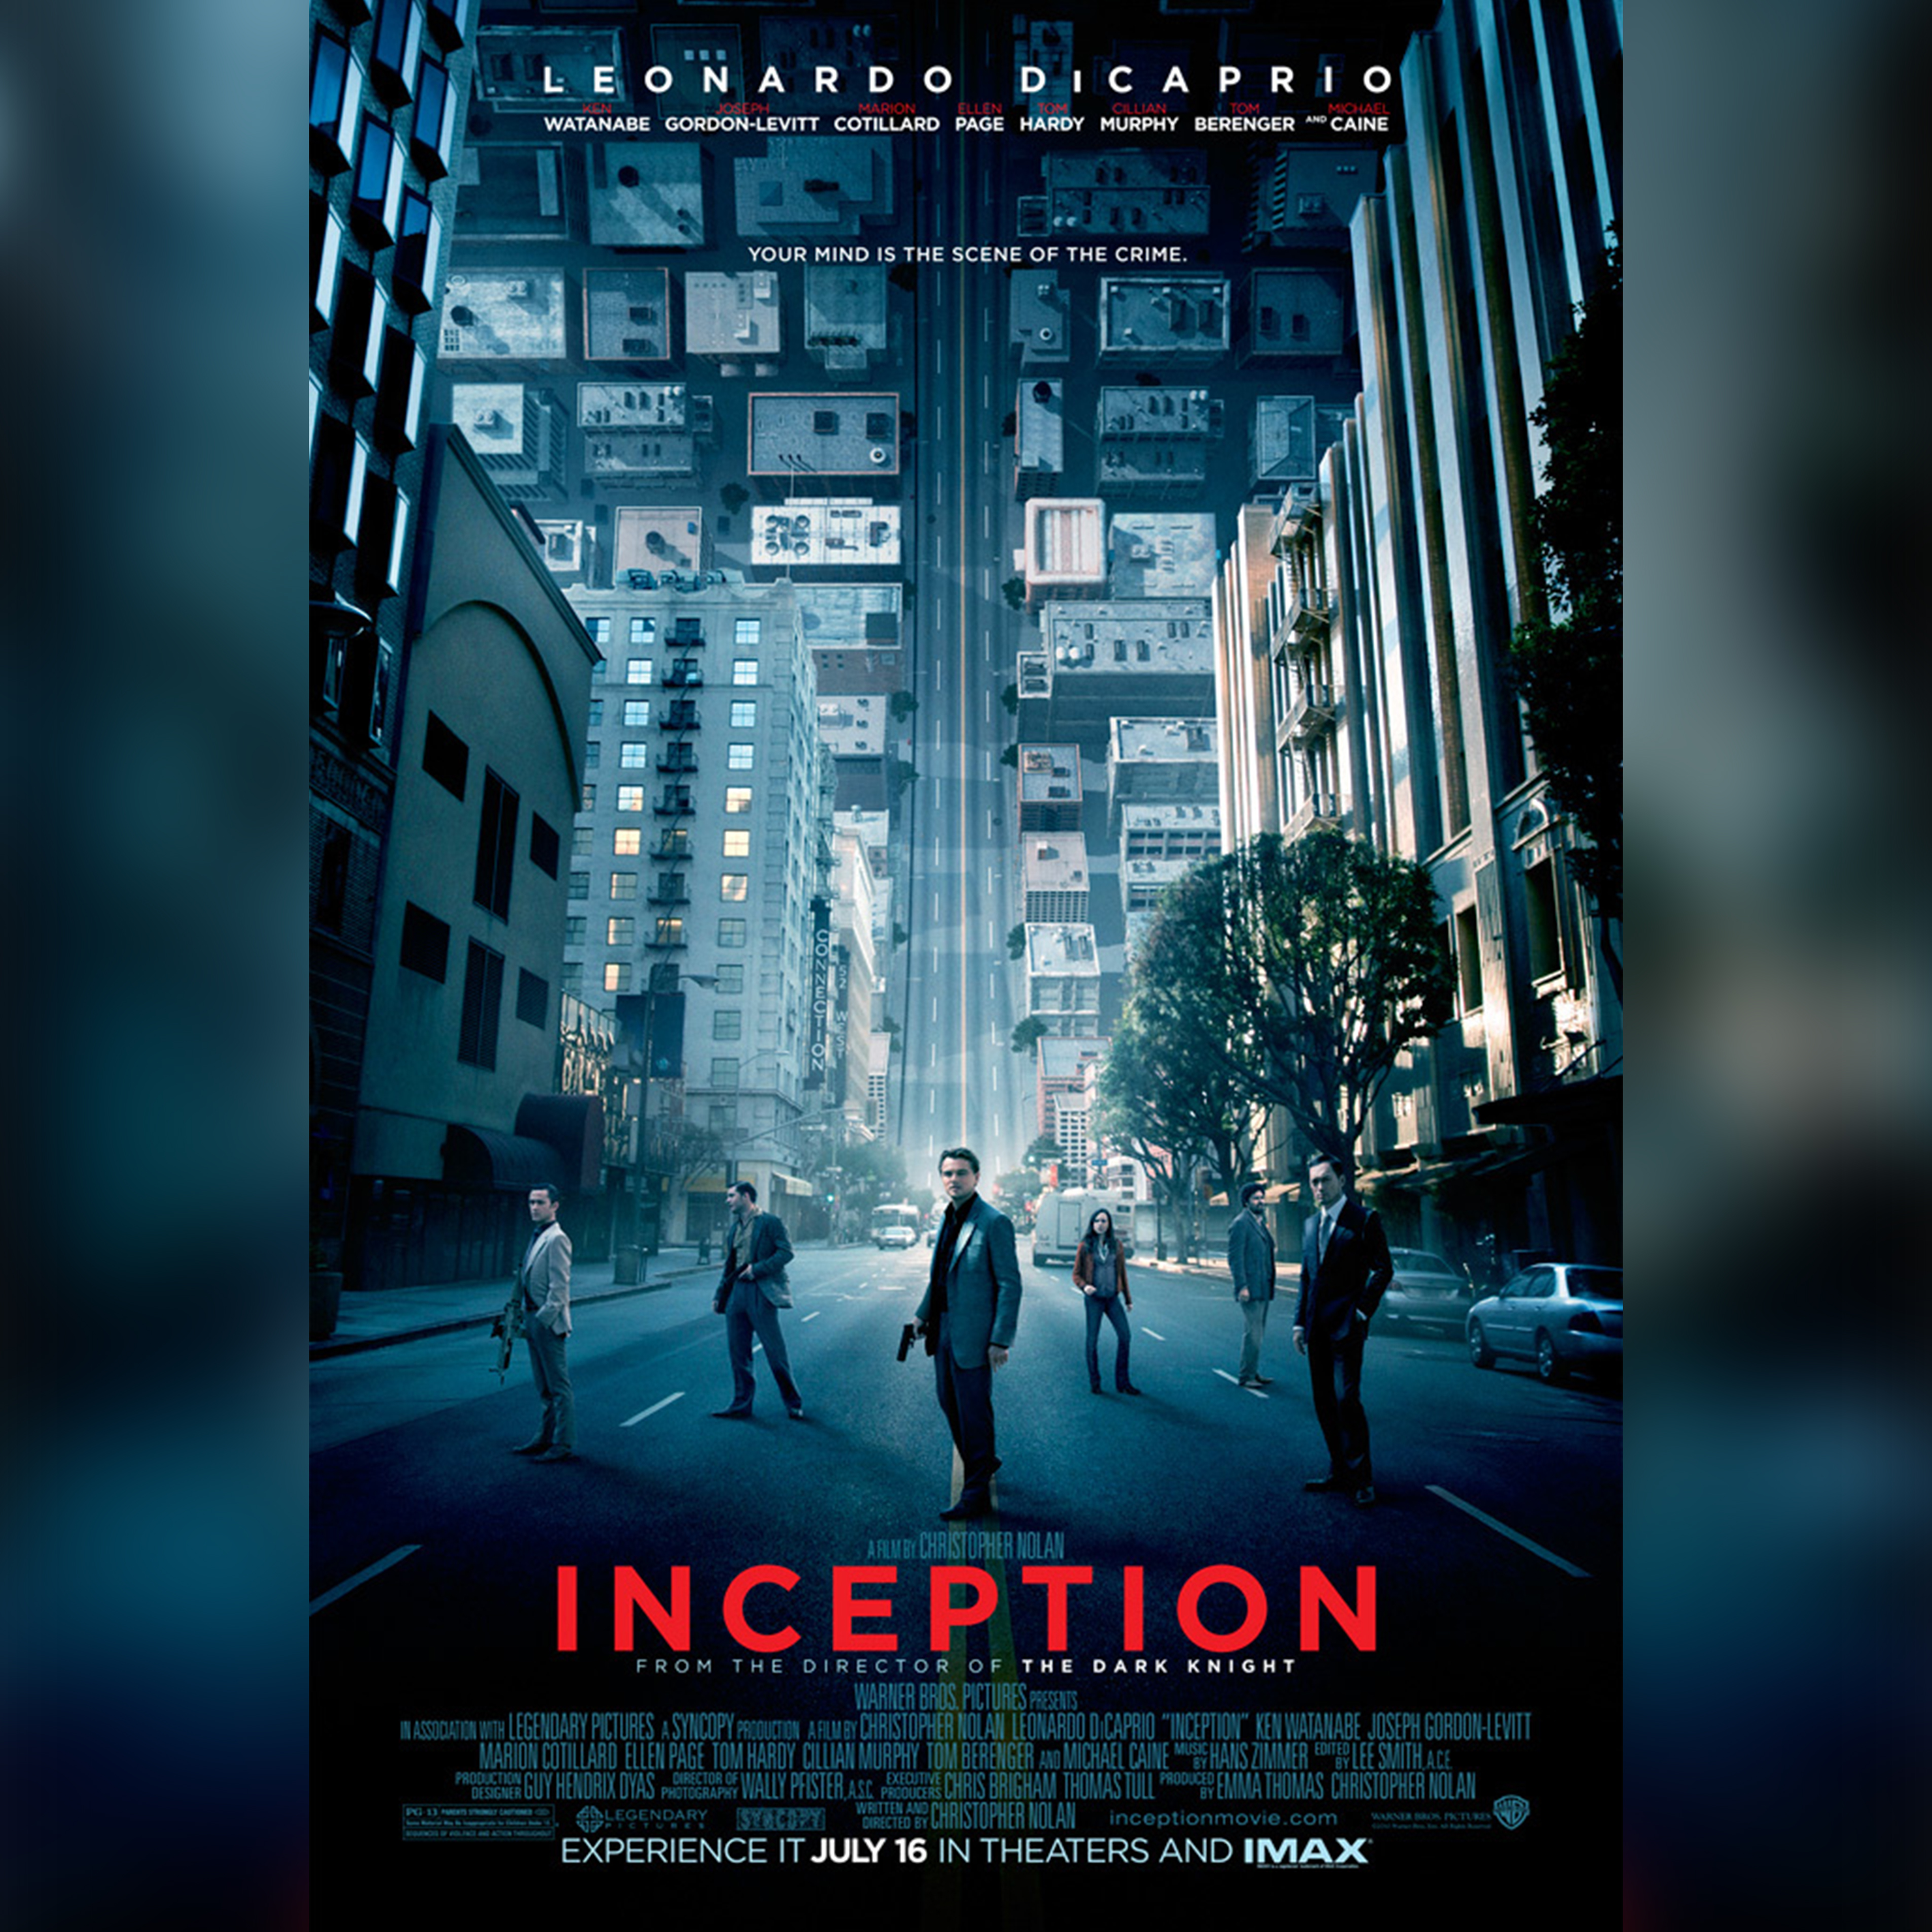 Film Review: “Inception” by Christopher Nolan & Warner Bros. Pictures